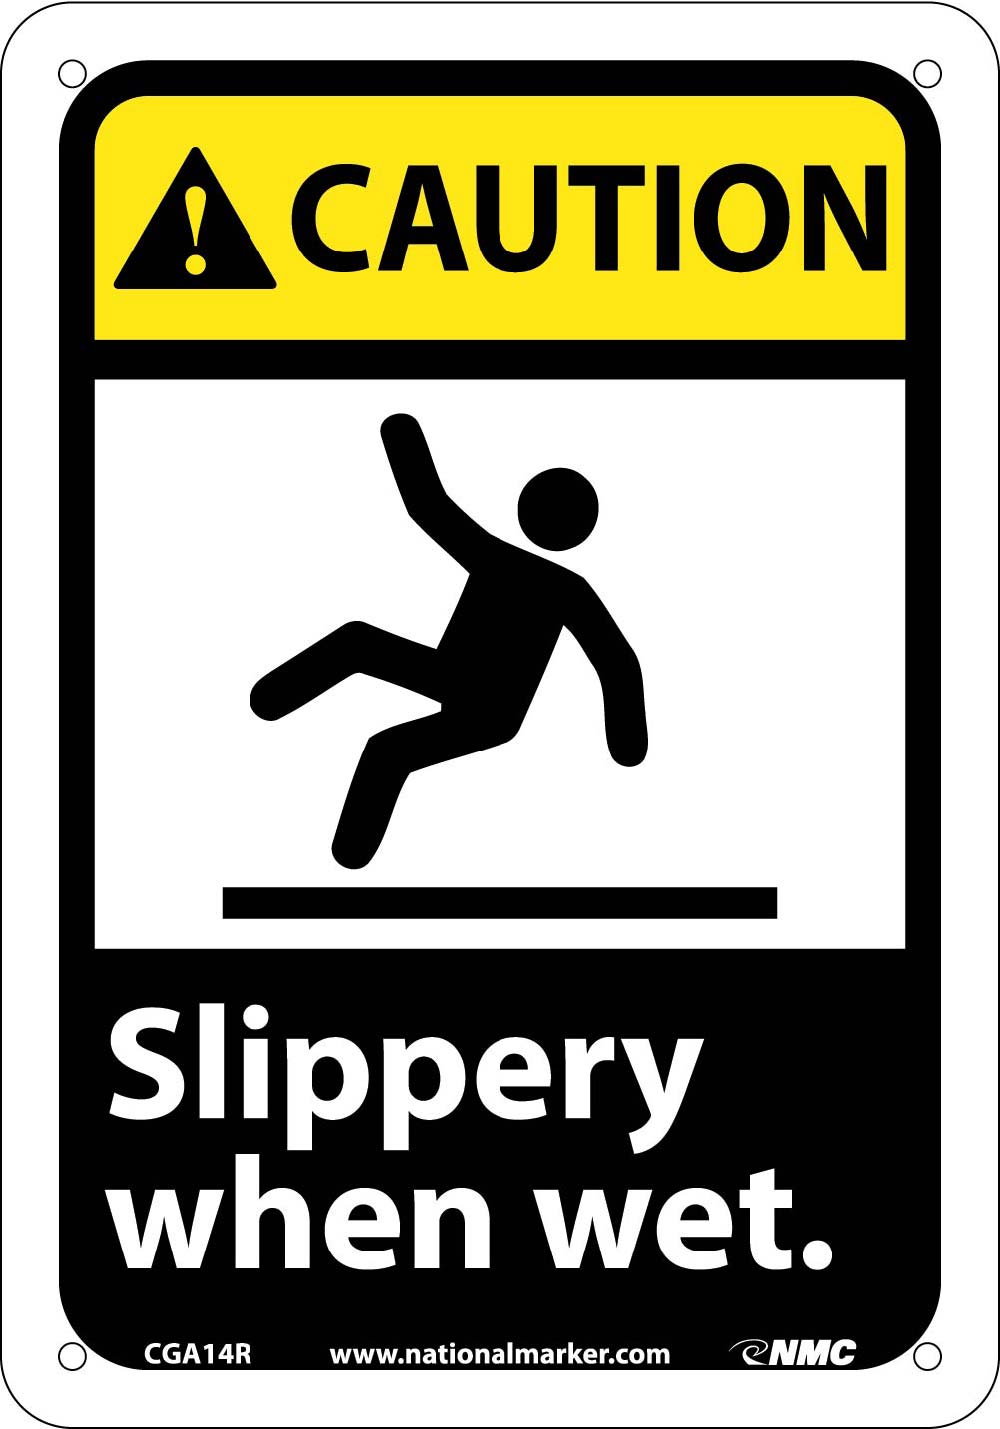 Caution Slippery When Wet Sign-eSafety Supplies, Inc